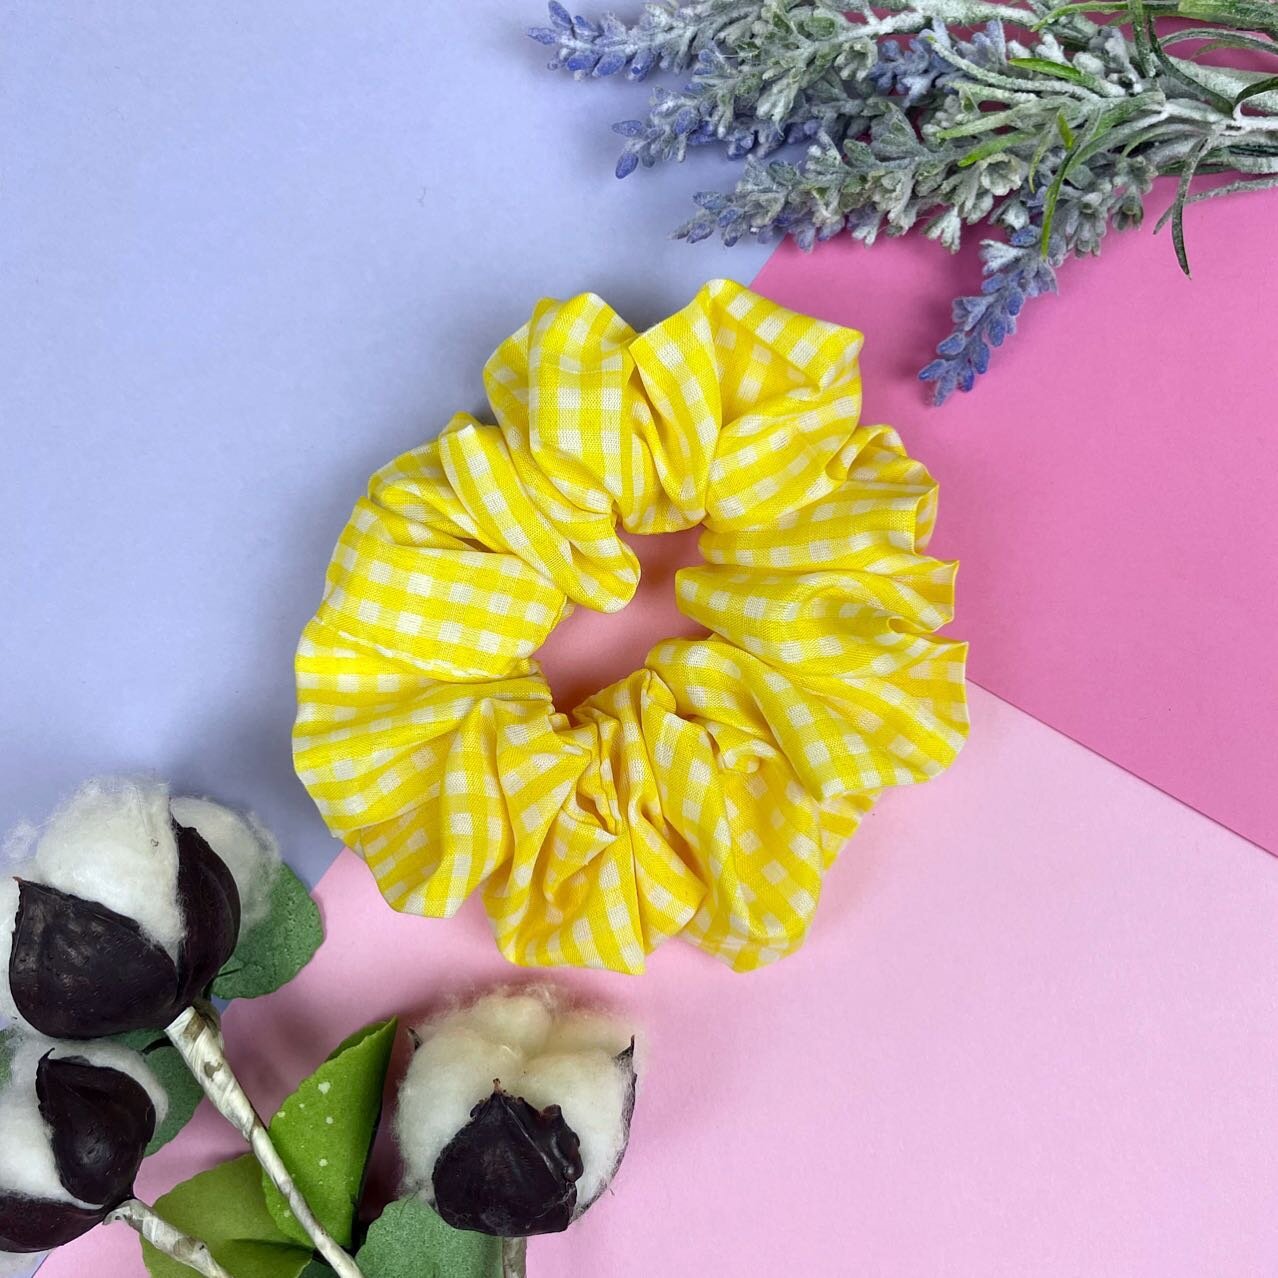 Scrunchie made from THE BRIGHTEST yellow gingham scraps I&rsquo;ve ever seen 💛💛💛
.
.
.
#sustainablesmallbusiness #ethicalsmallbusiness #scrunchie #handmadescrunchies #kawaiiaccessories #handmadeaccessories #kawaiismallbusiness #ethicalclothing #et